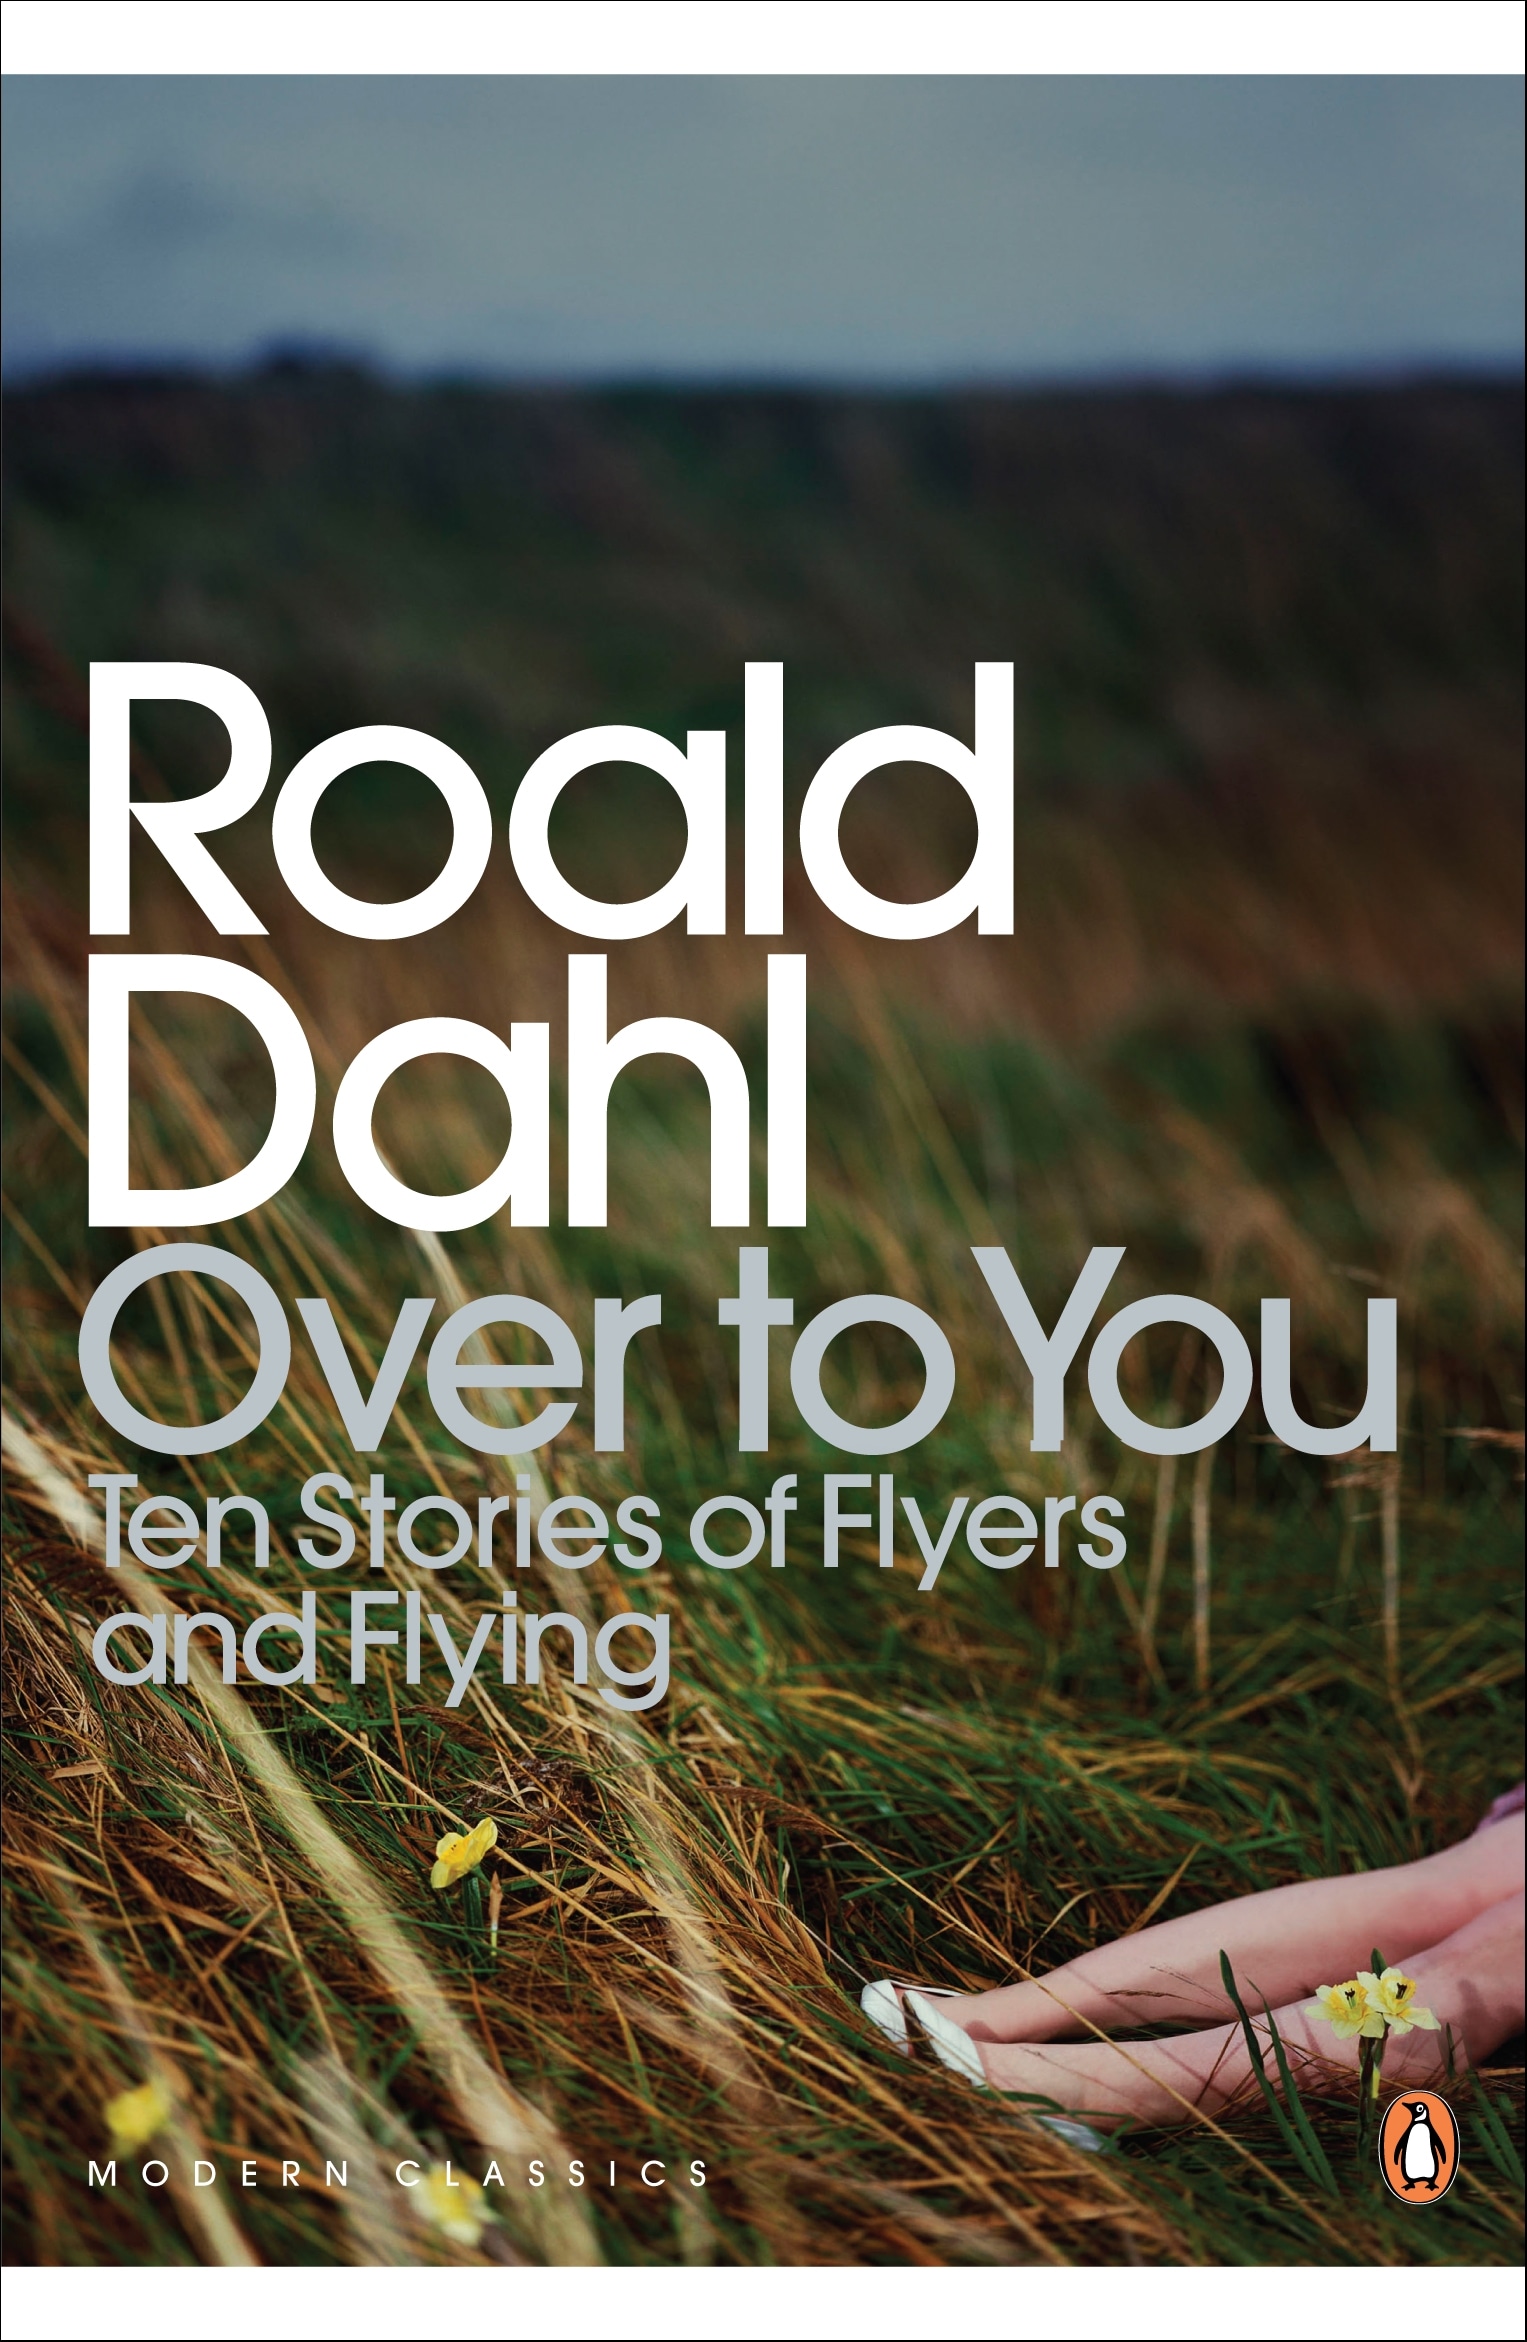 Book “Over to You” by Roald Dahl — January 28, 2010